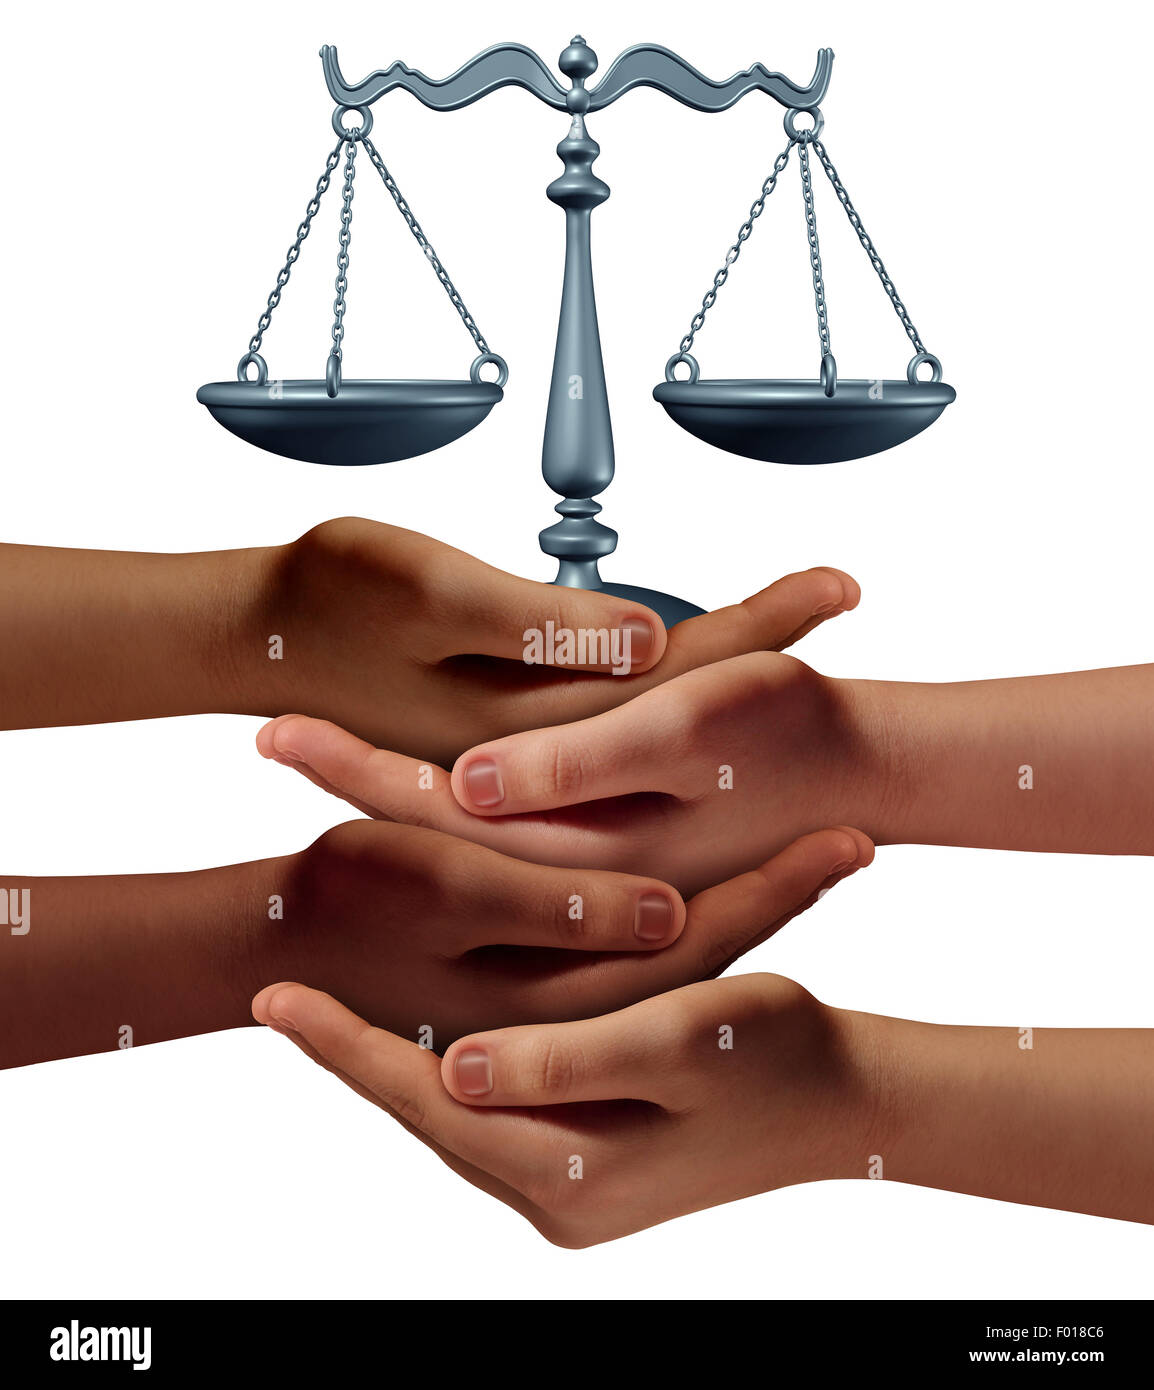 Community legal assistance concept with a group of hands representing diverse groups of people cooperating together to provide law and justice support and advice holding a justice scale. Stock Photo